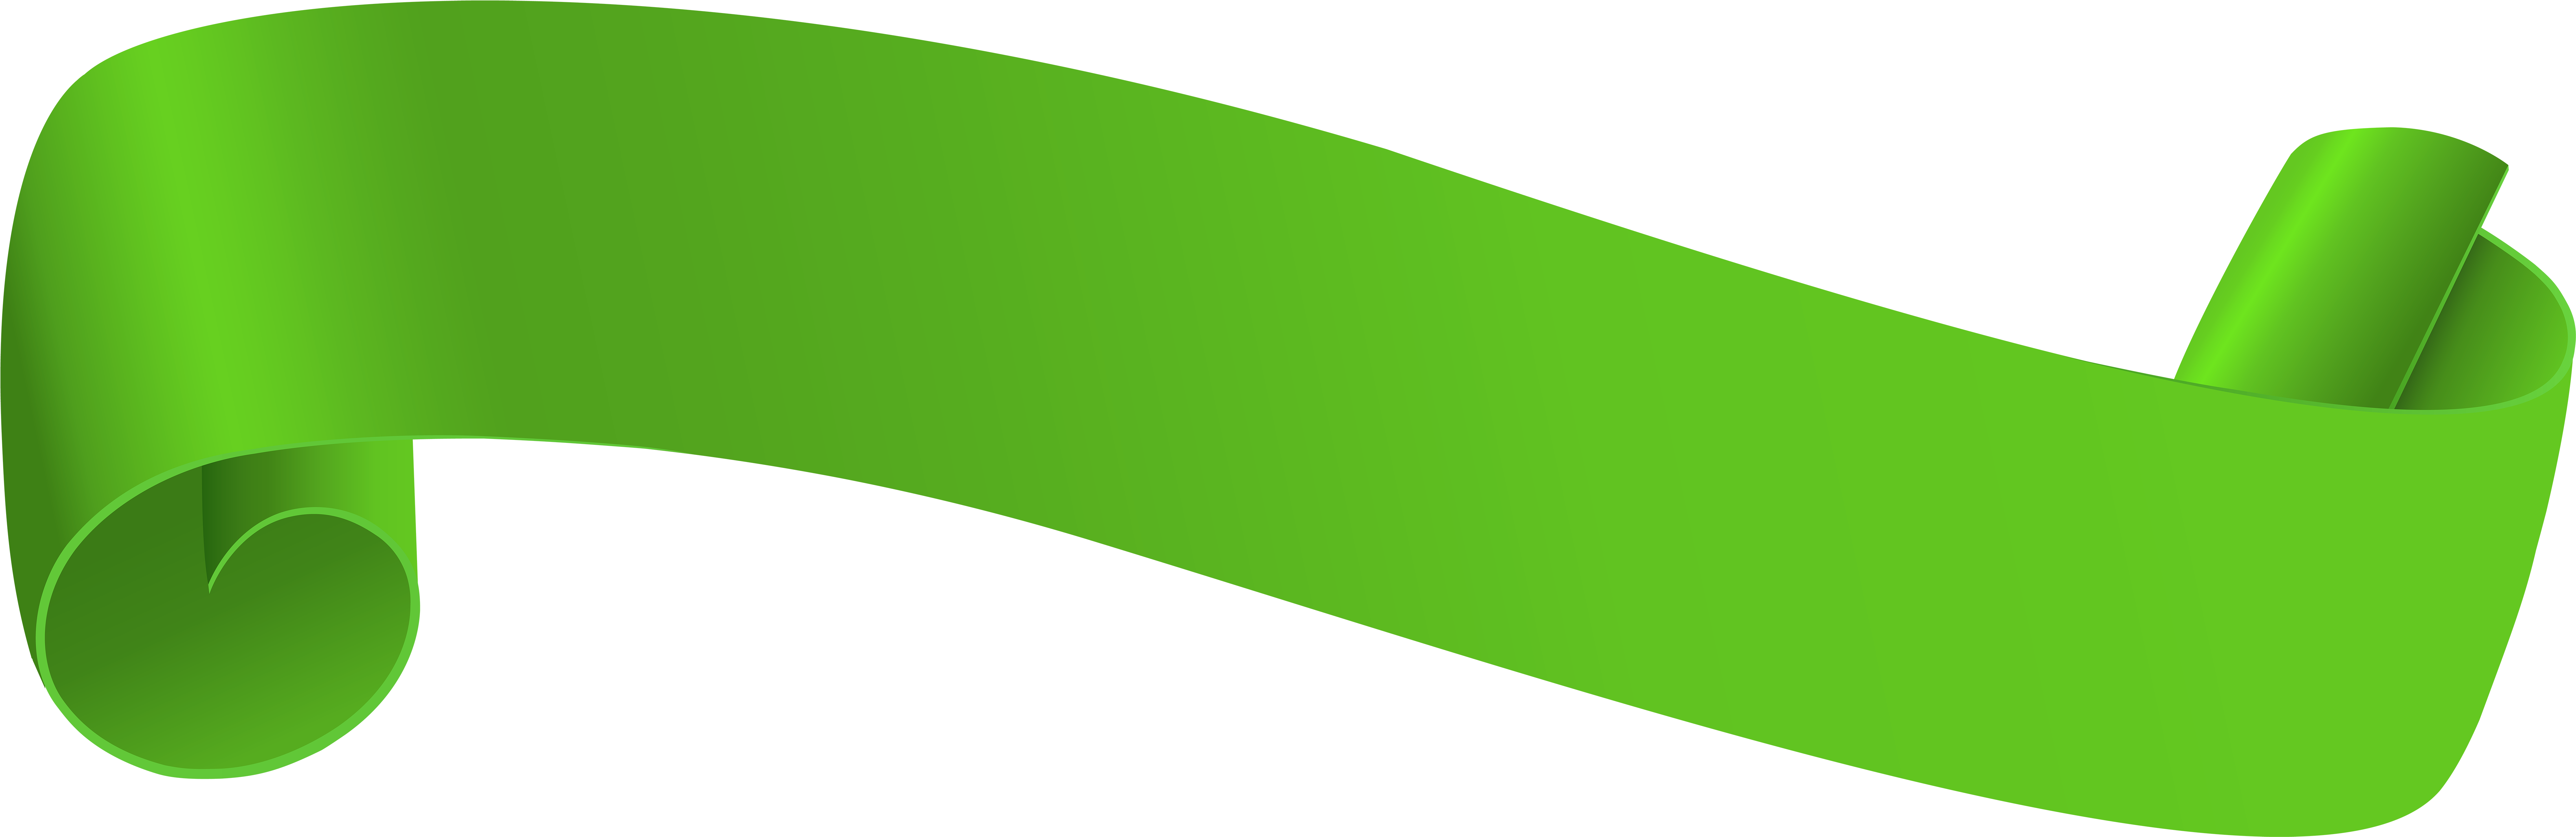 Green Banner Png 7925 X 2576